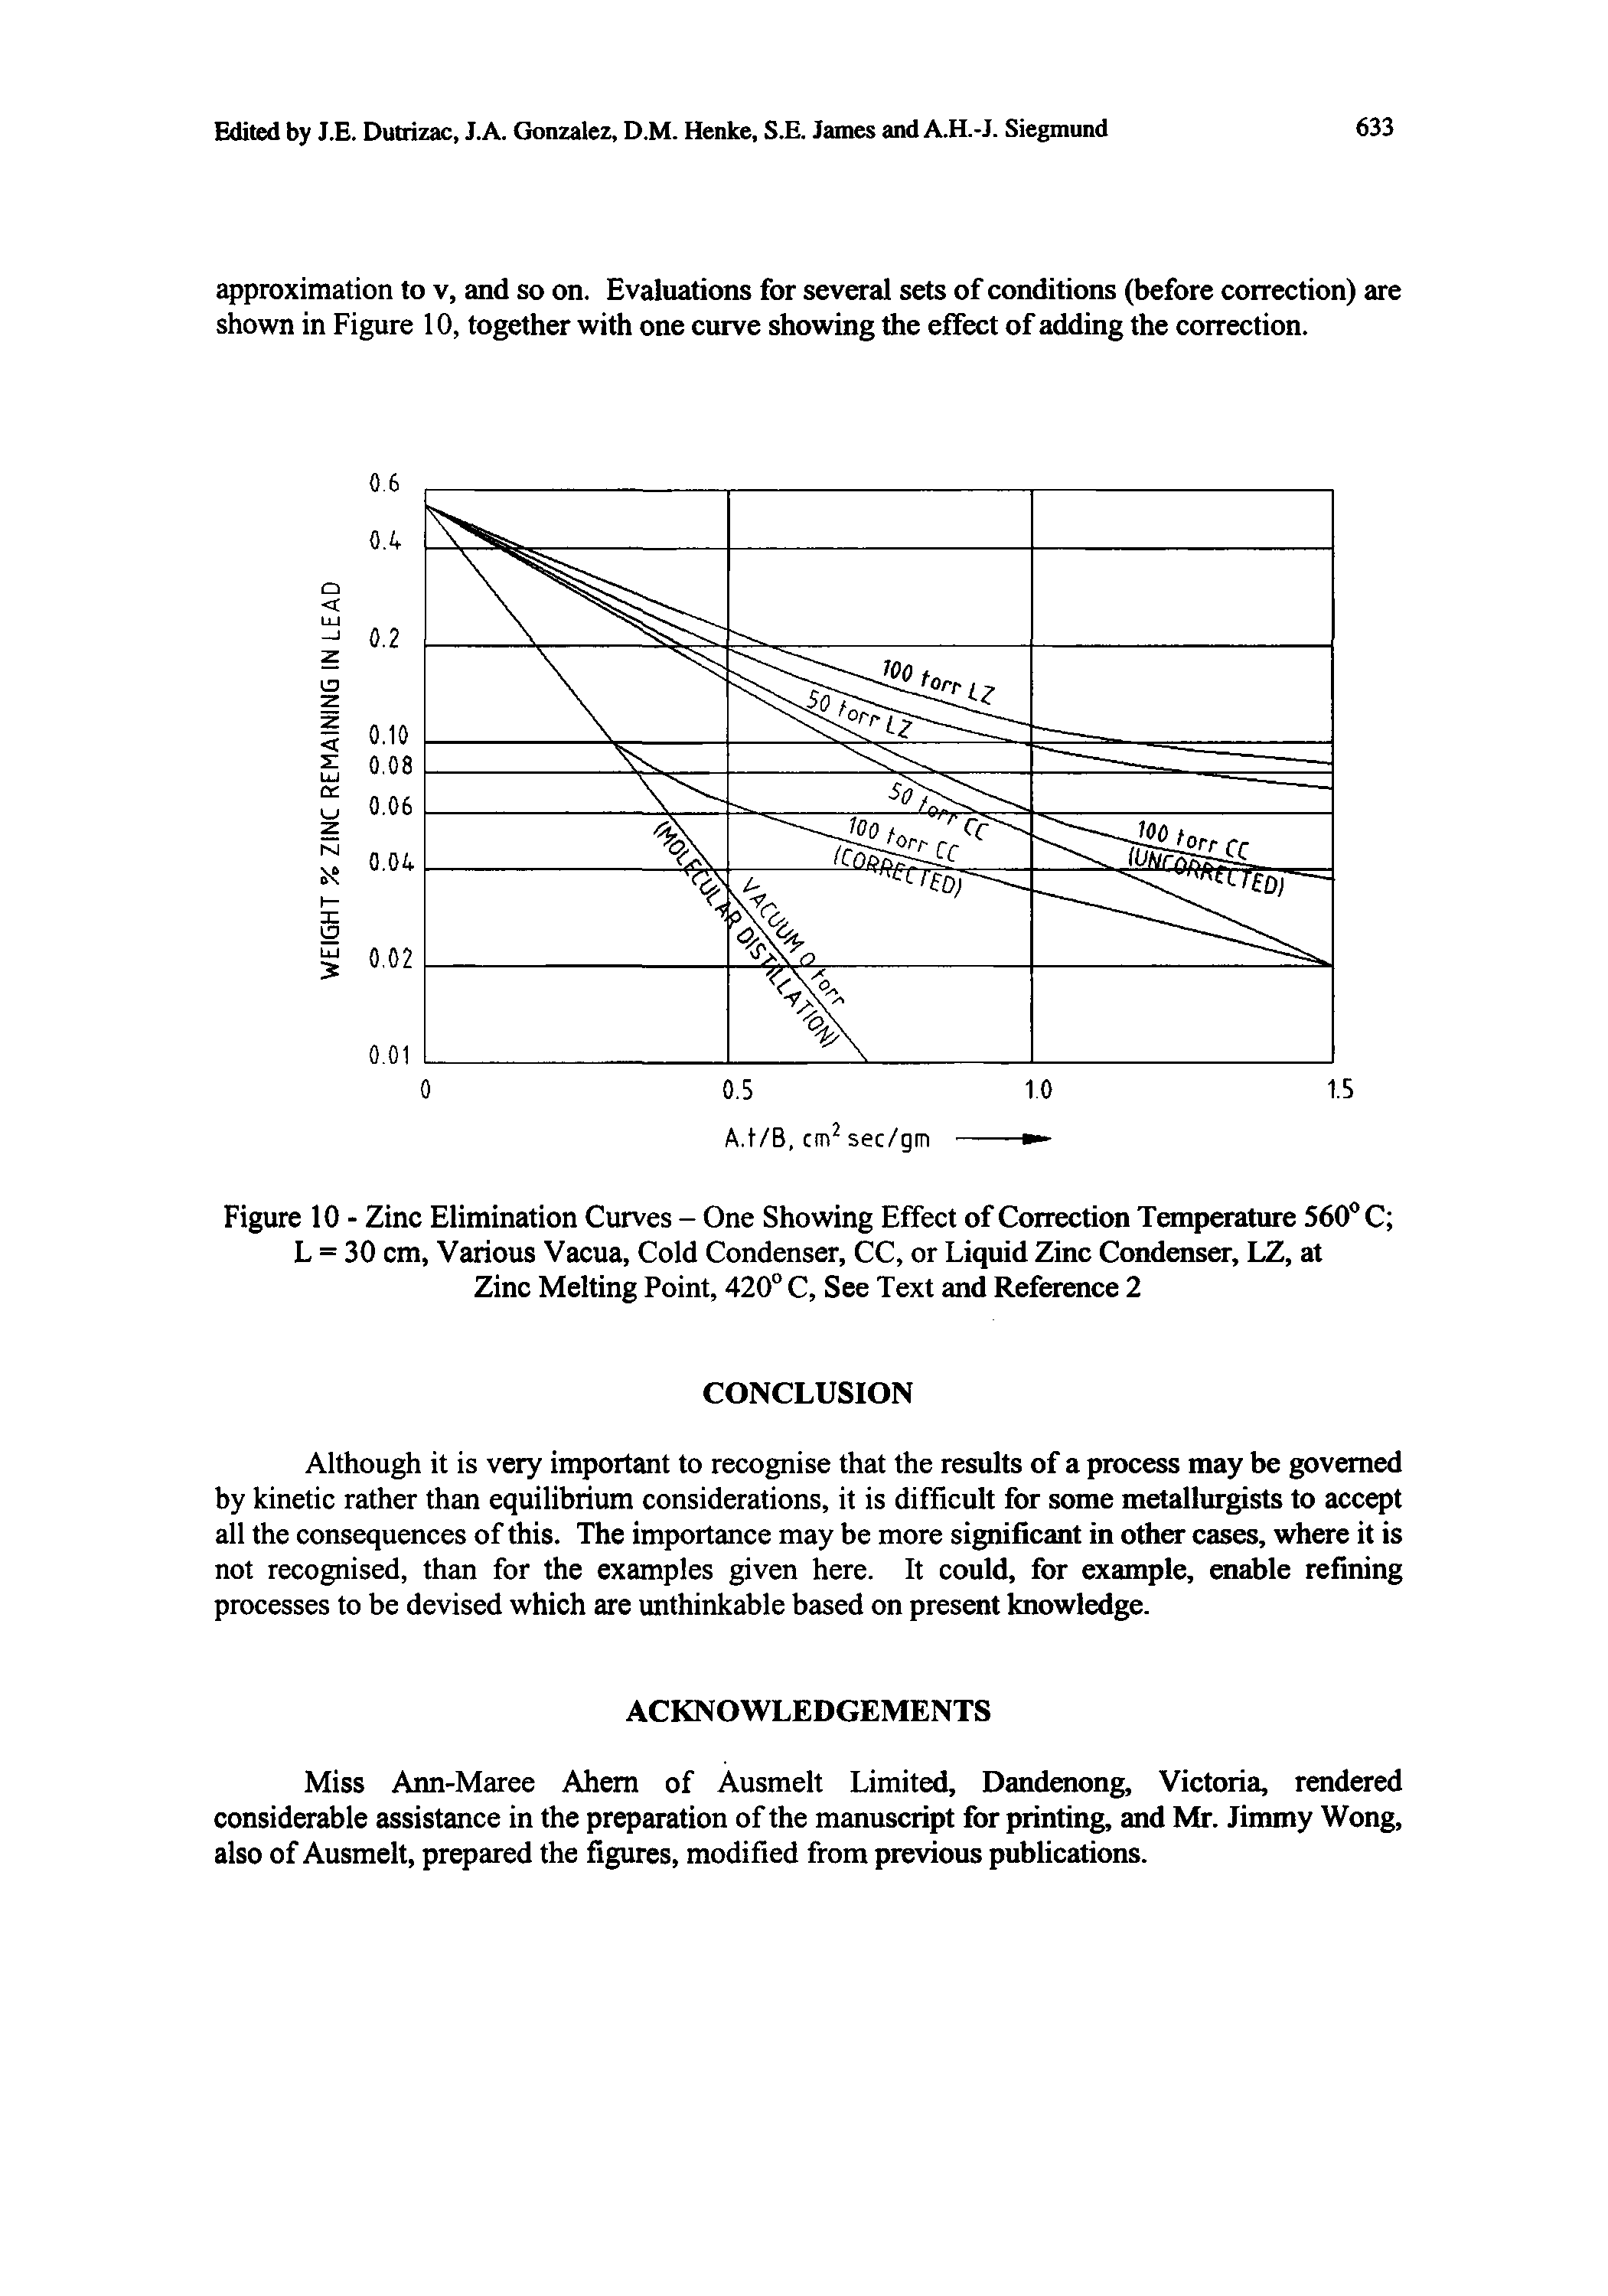 Figure 10 - Zinc Elimination Curves - One Showing Effect of Correction Temperature 560 C L = 30 cm, Various Vacua, Cold Condenser, CC, or Liquid Zinc Condenser, LZ, at Zinc Melting Point, 420° C, See Text and Reference 2...